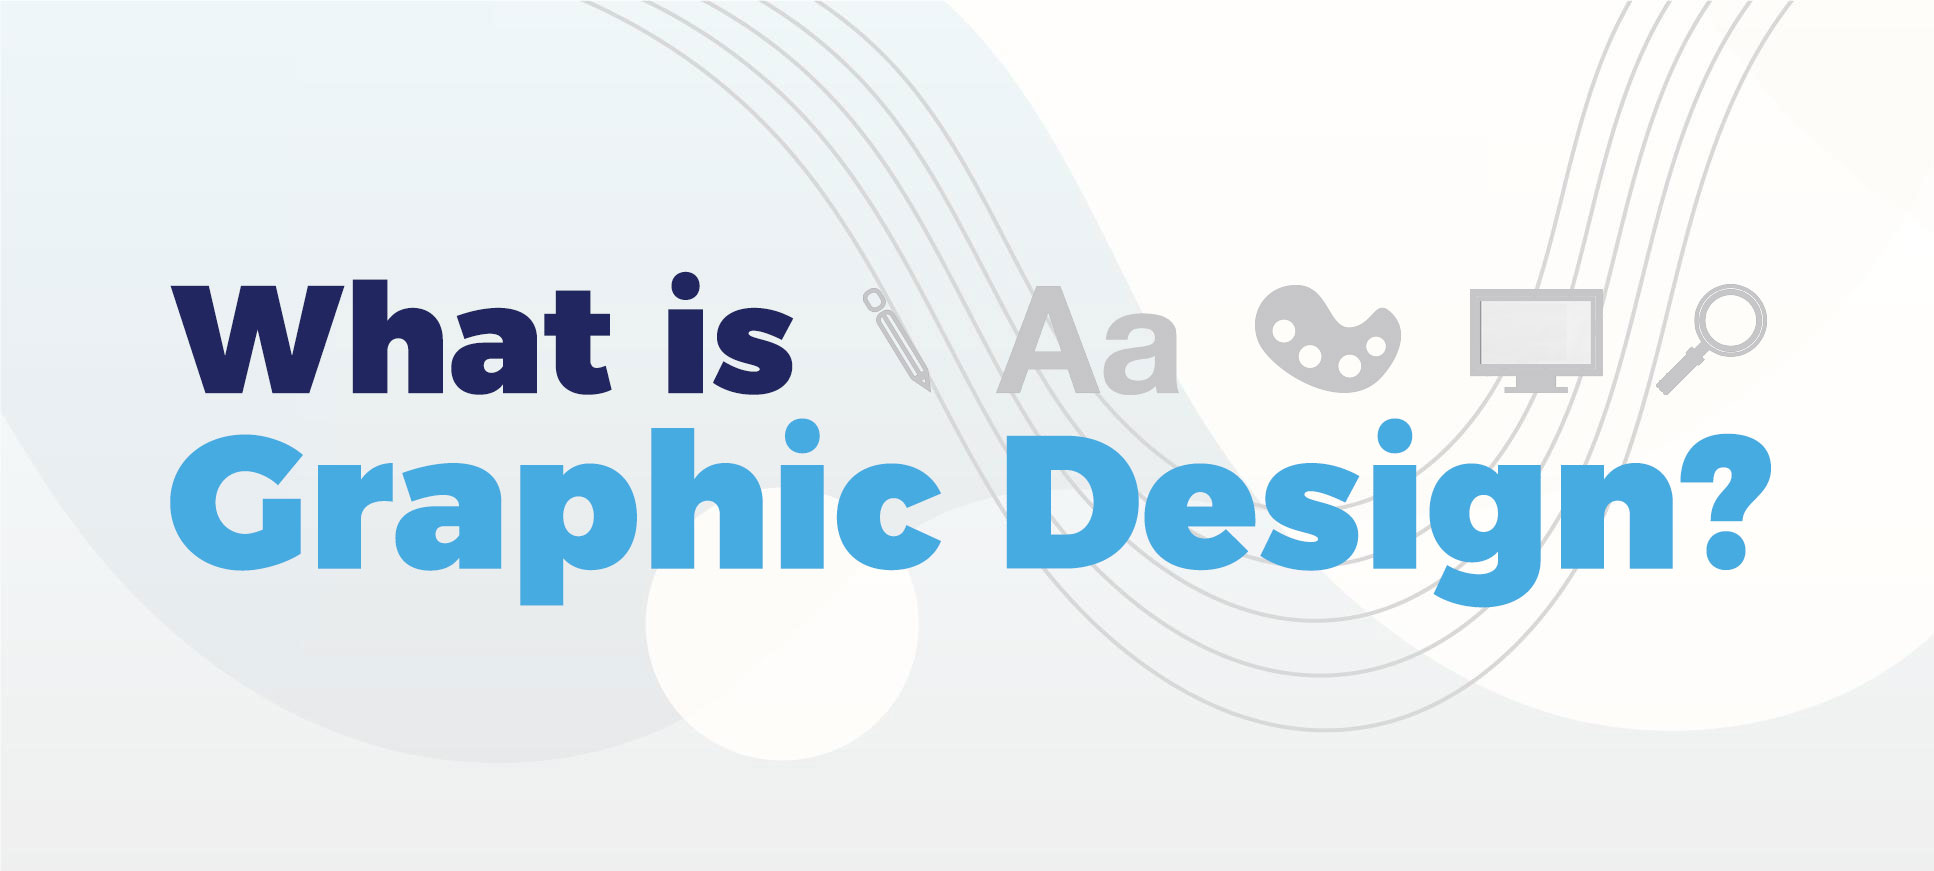 What is graphic design banner